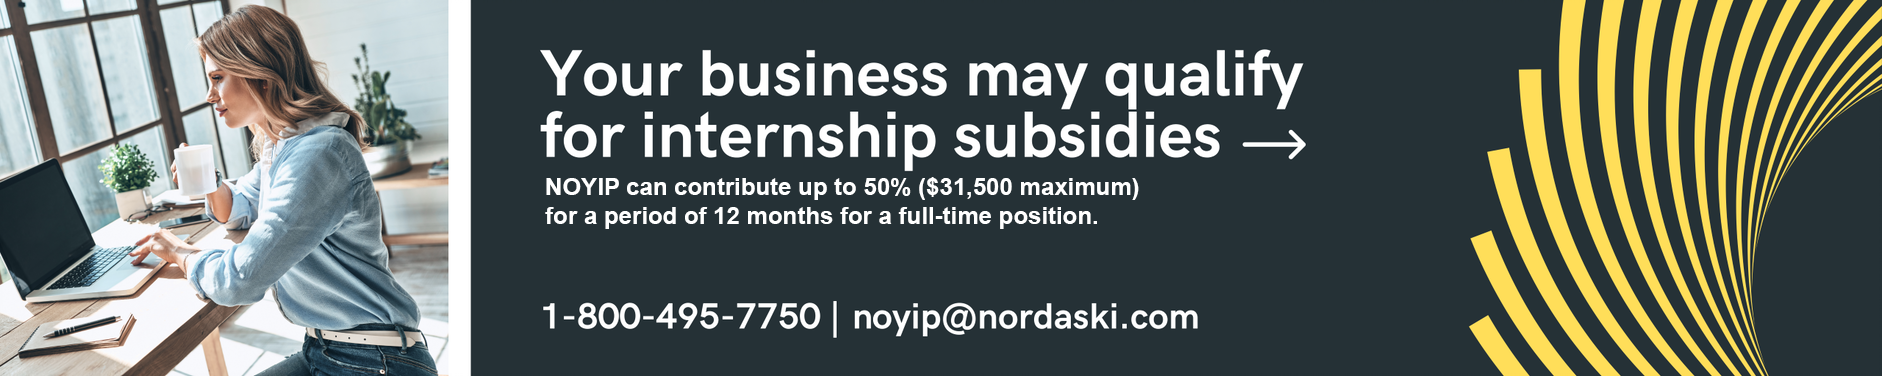 Your business may qualify for internship subsidies. 1-800-495-7750